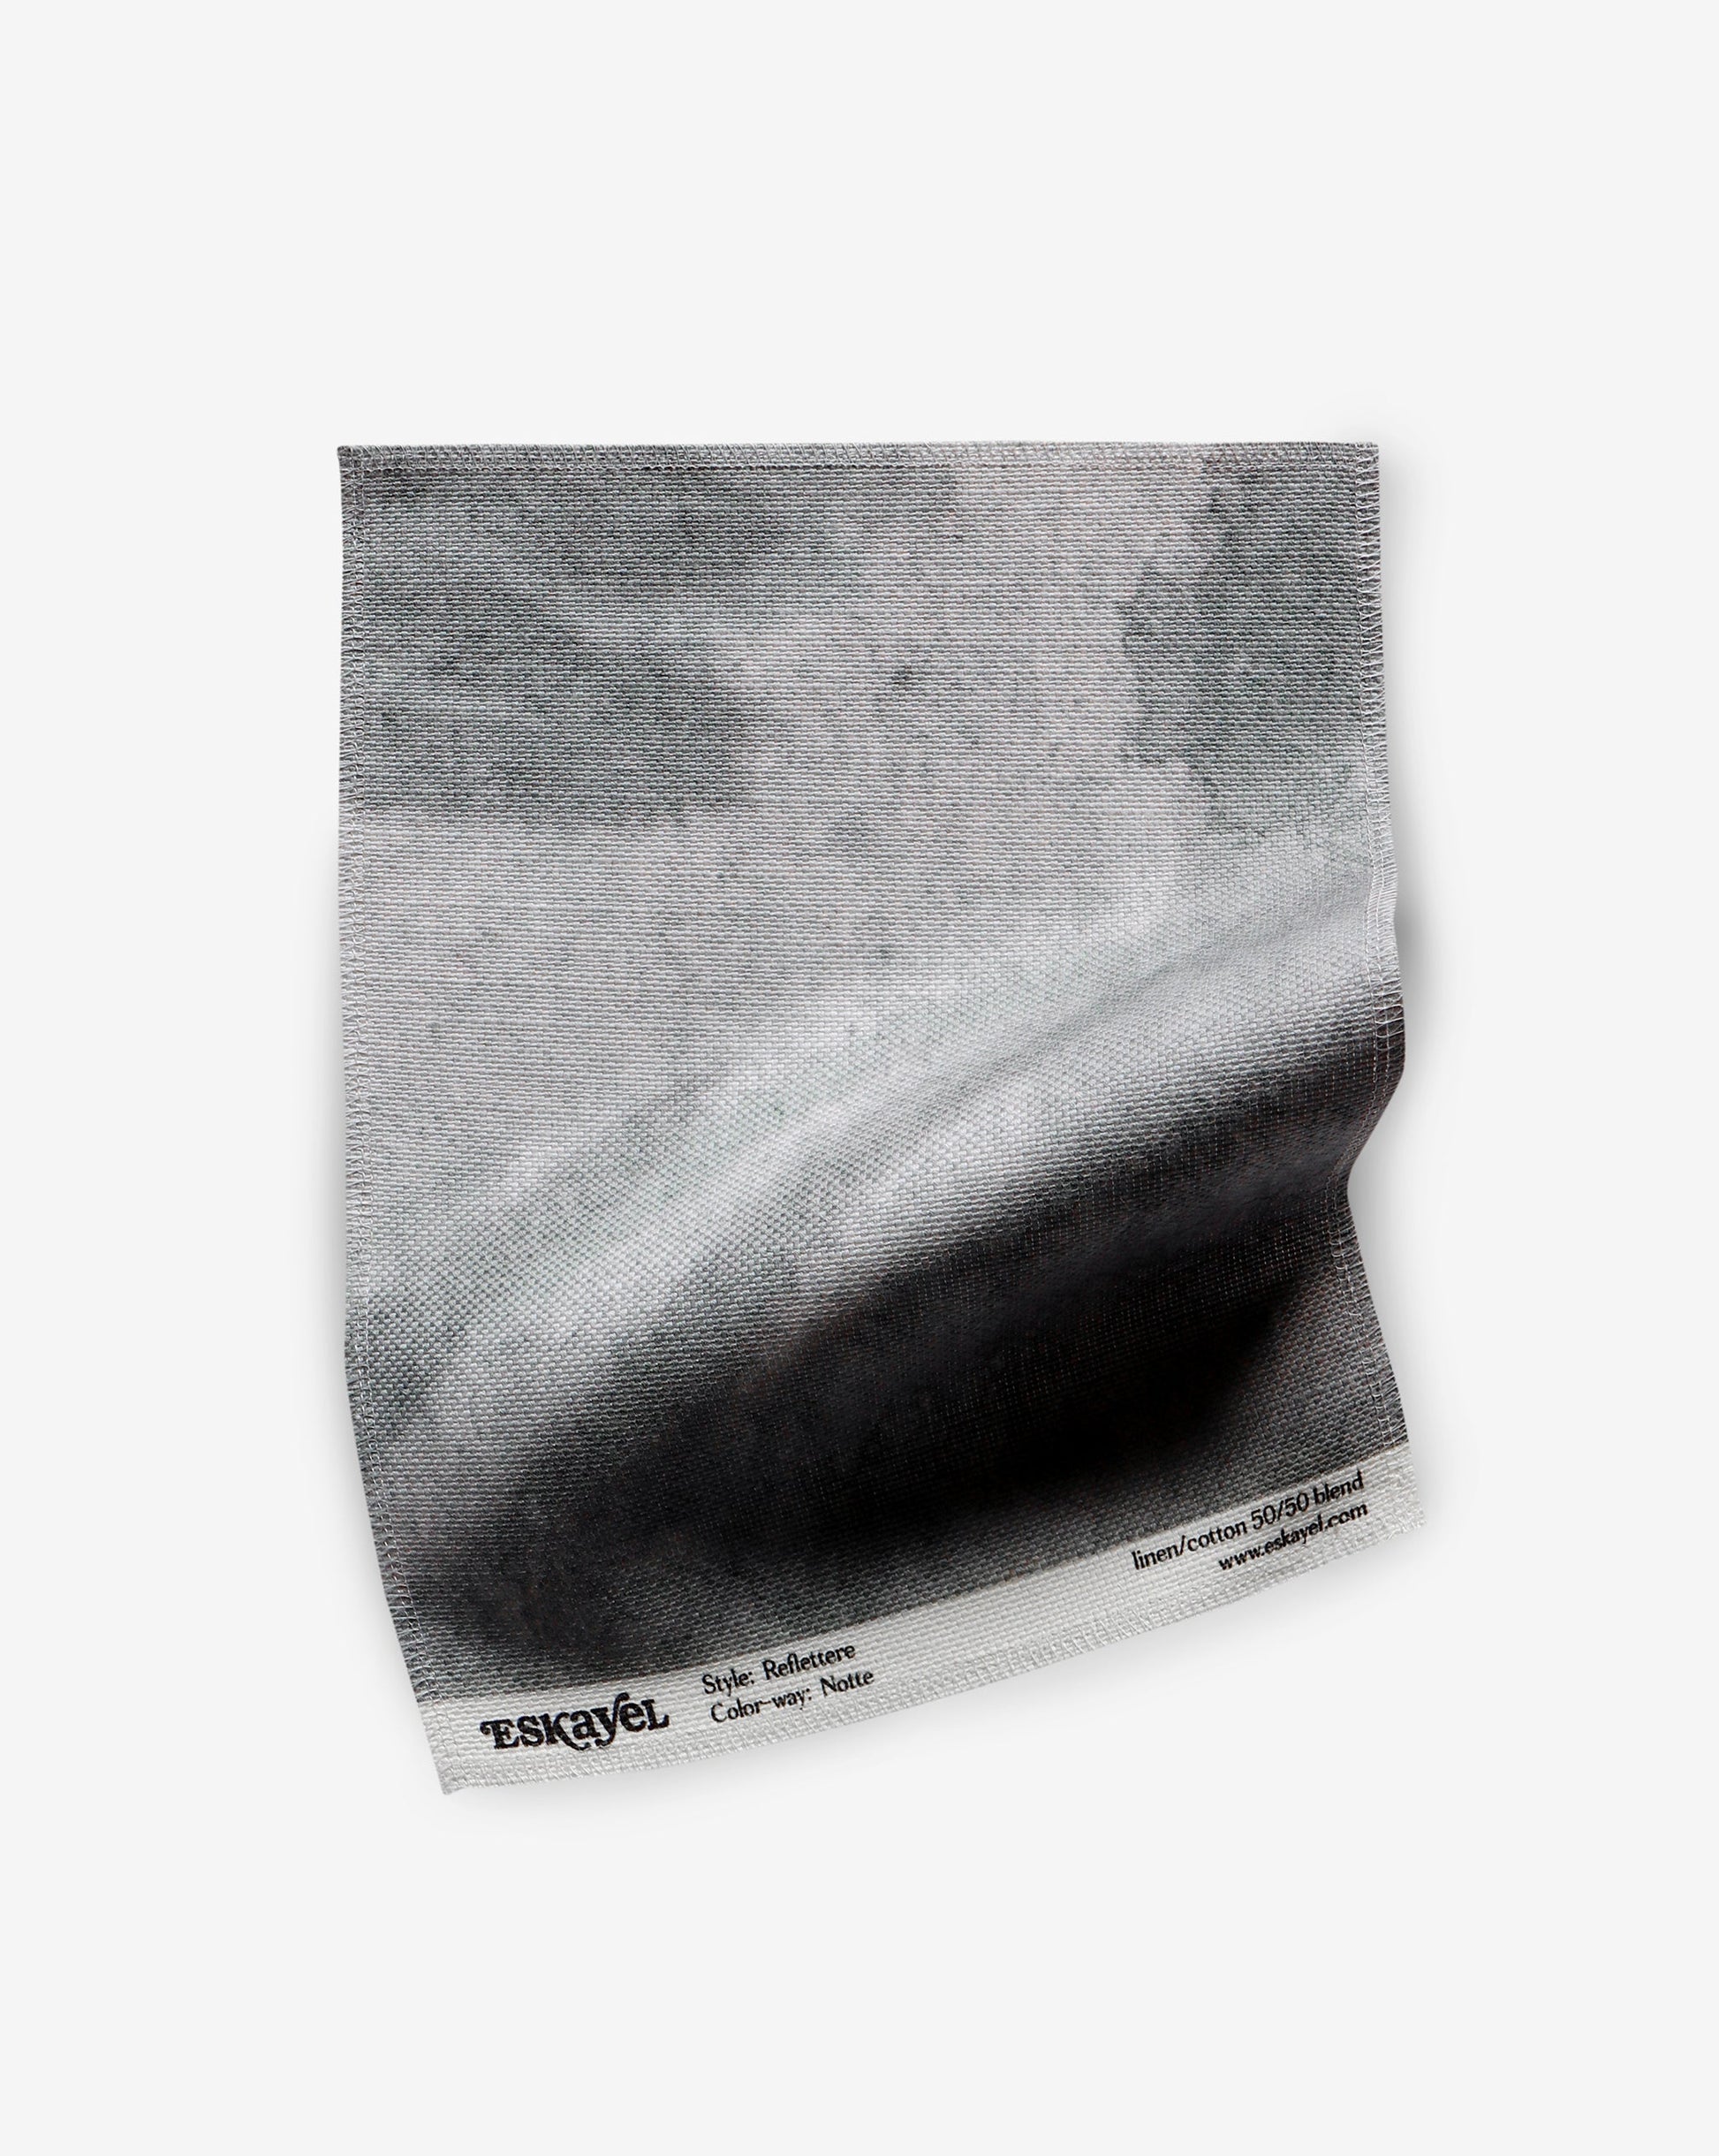 A black and white mural Reflettere Fabric||Notte of a wave on a white surface.